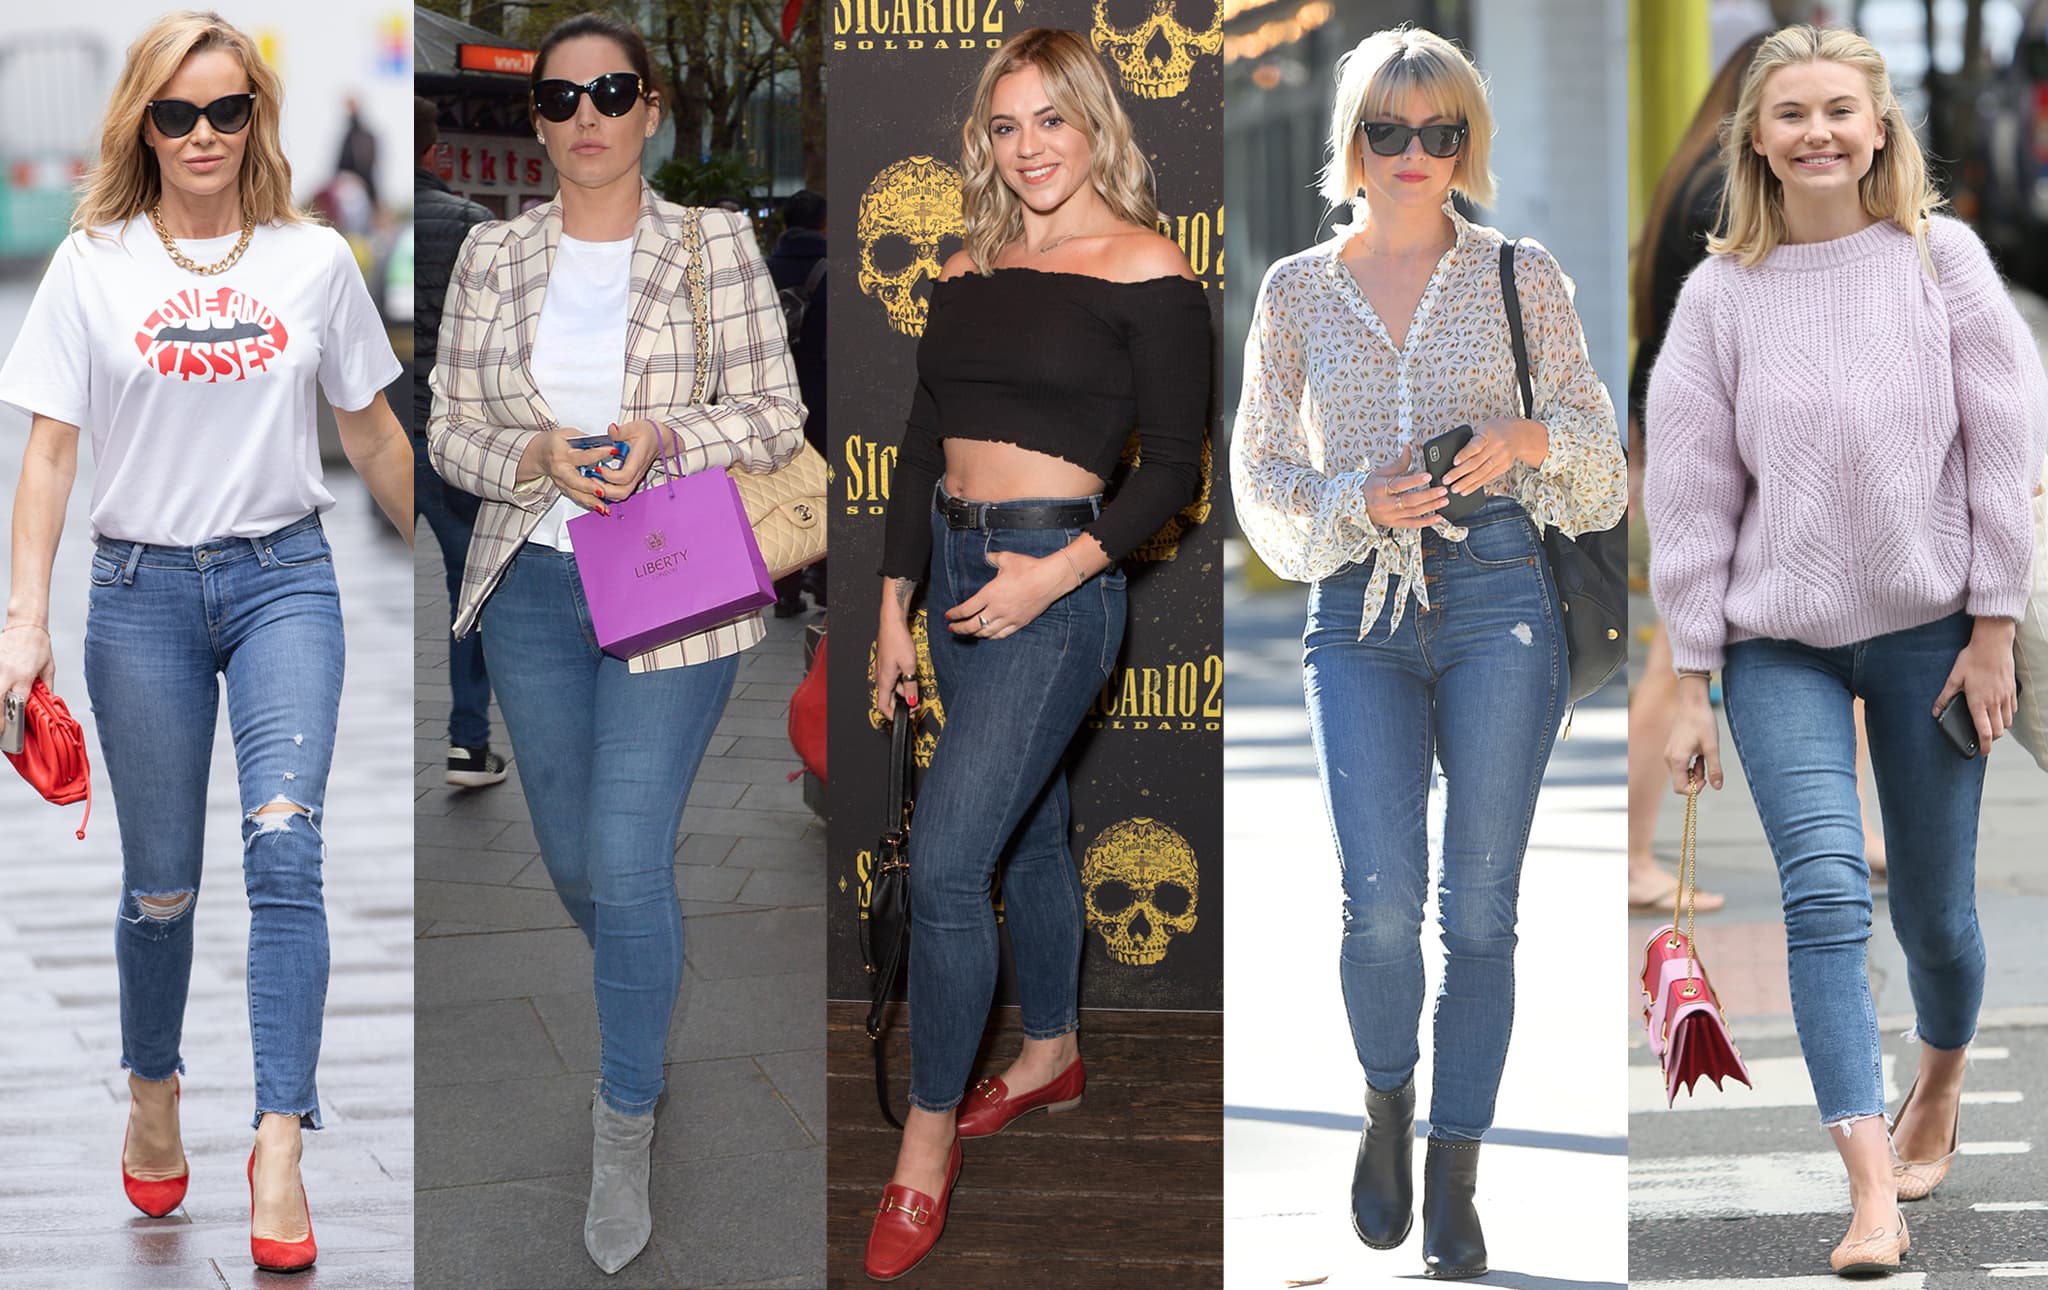 Amanda Holden, Kelly Brook, Laura Crane, Julianne Hough, and Georgia Toffolo show how to wear skinny jeans